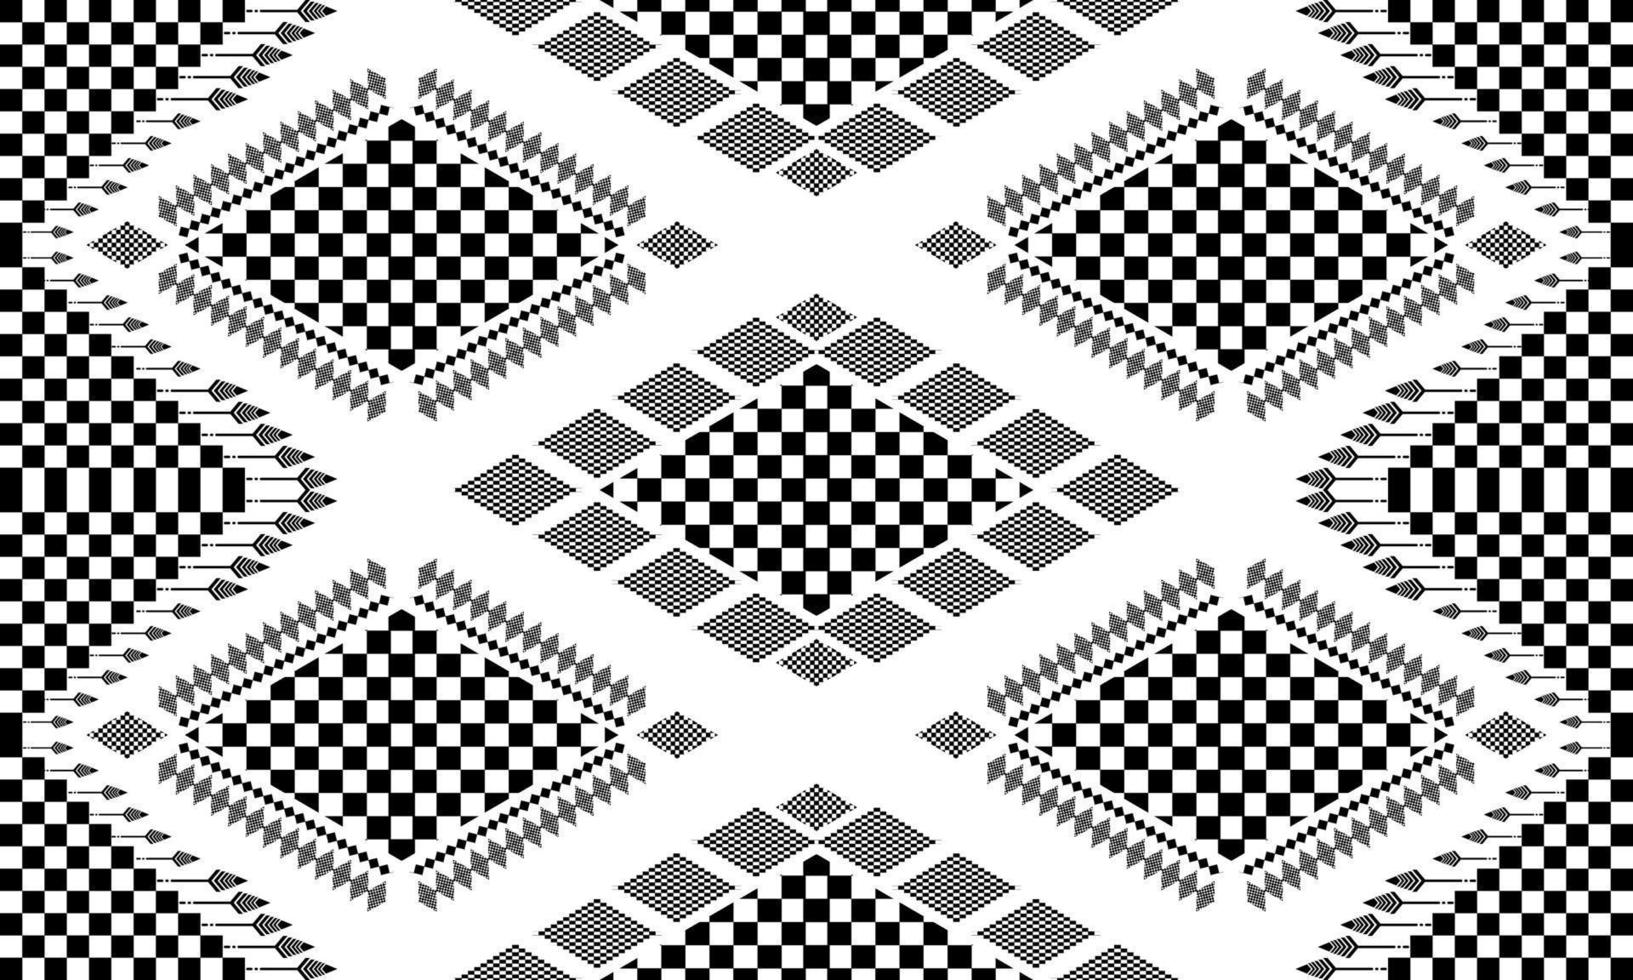 Ethnic folk geometric seamless pattern in black and white tone in vector illustration design for fabric, mat, carpet, scarf, wrapping paper, tile and more